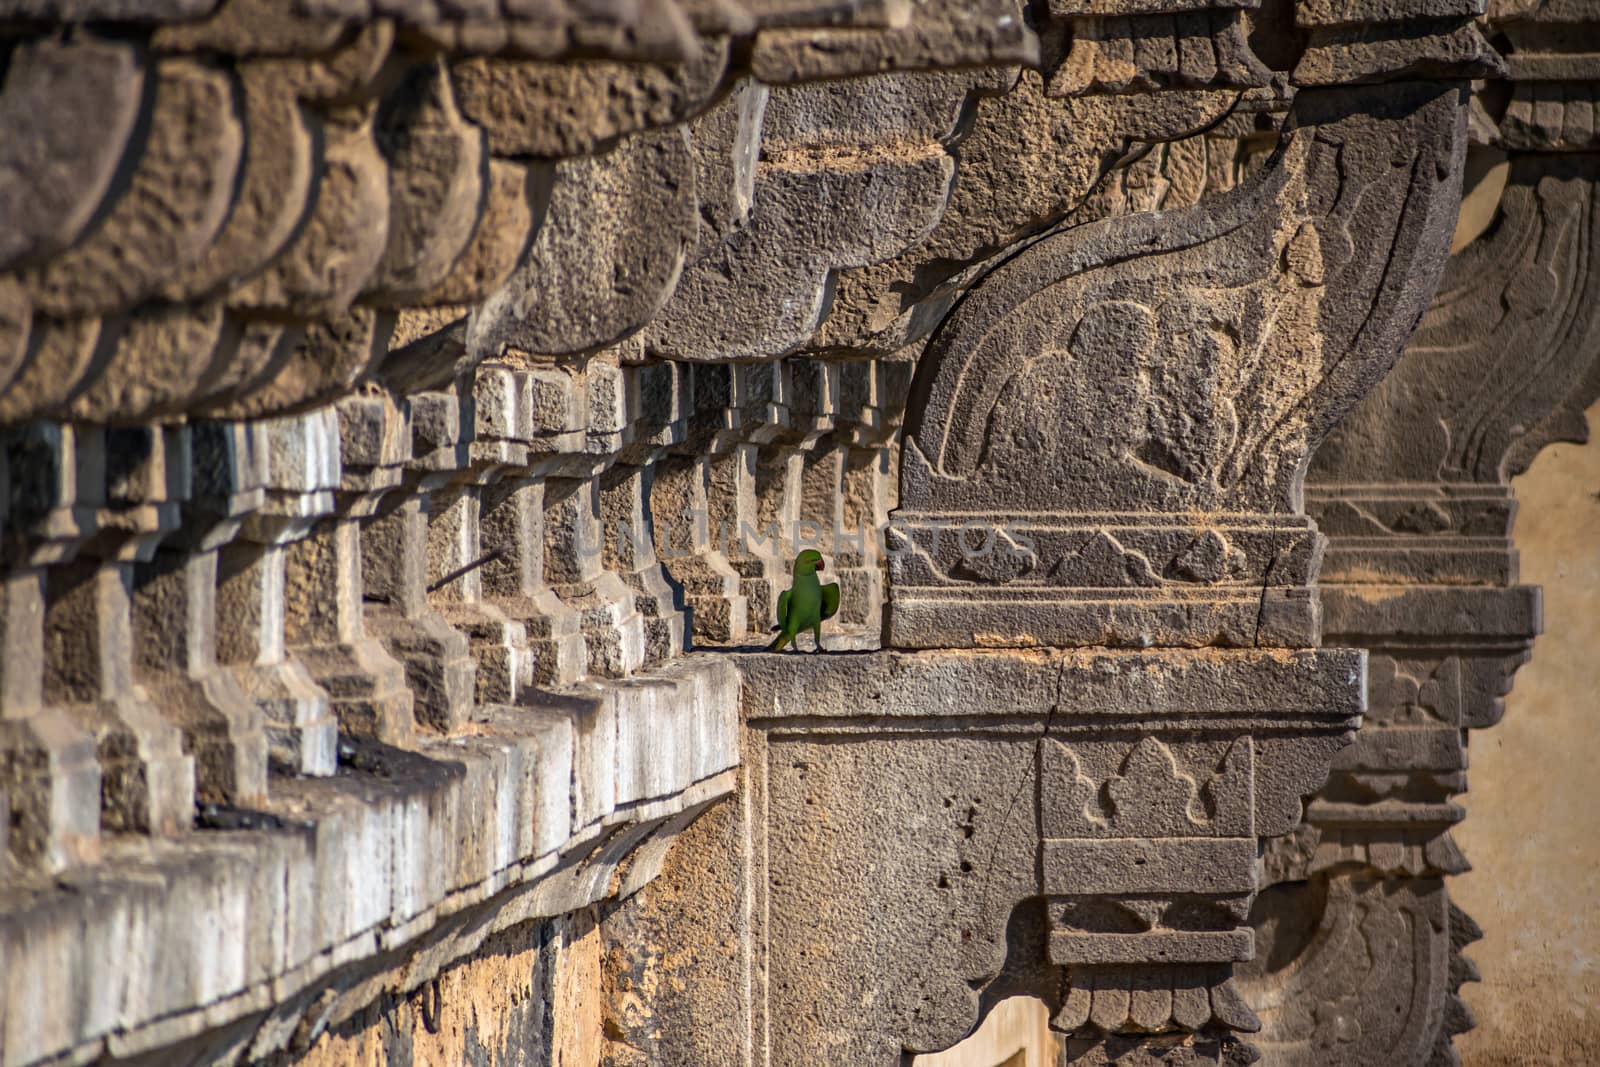 A parrot sitting on the side wall of heritage structure of Gol Ghumbaj -  The mausoleum of king Mohammed Adil Shah, Sultan of Bija by lalam